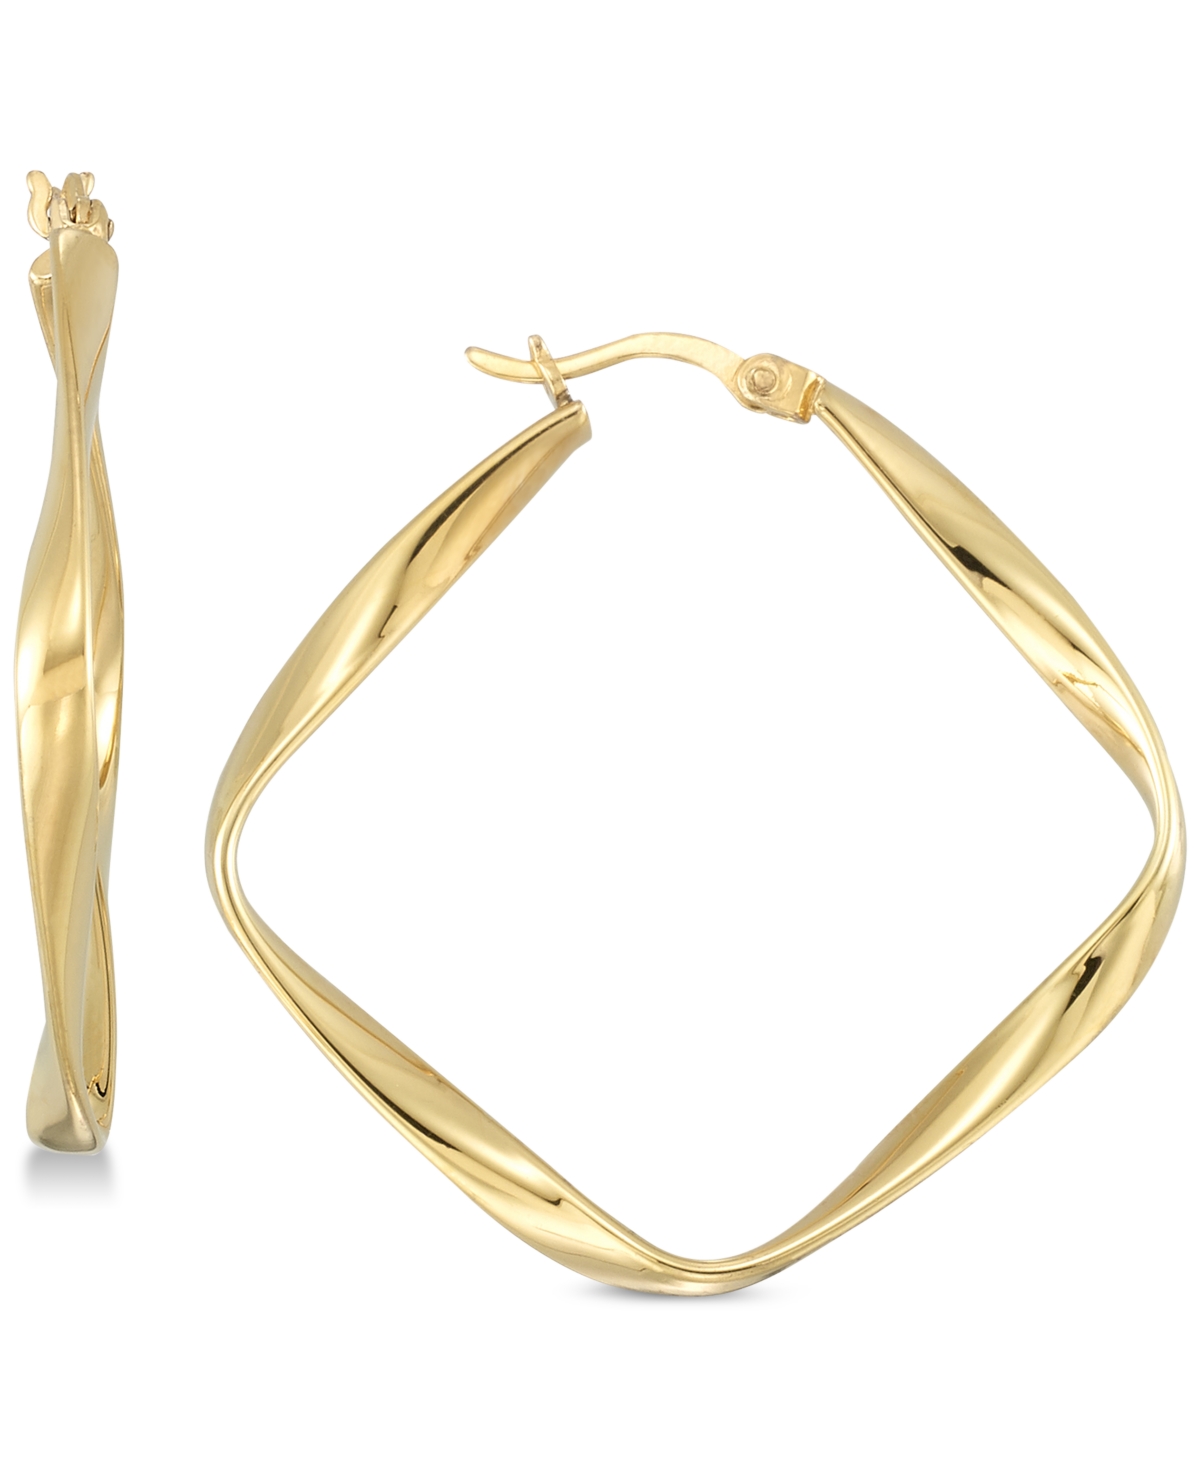 Simone I. Smith Twisted Square Hoop Earrings In 18k Gold Over Sterling Silver In K Gold Over Silver